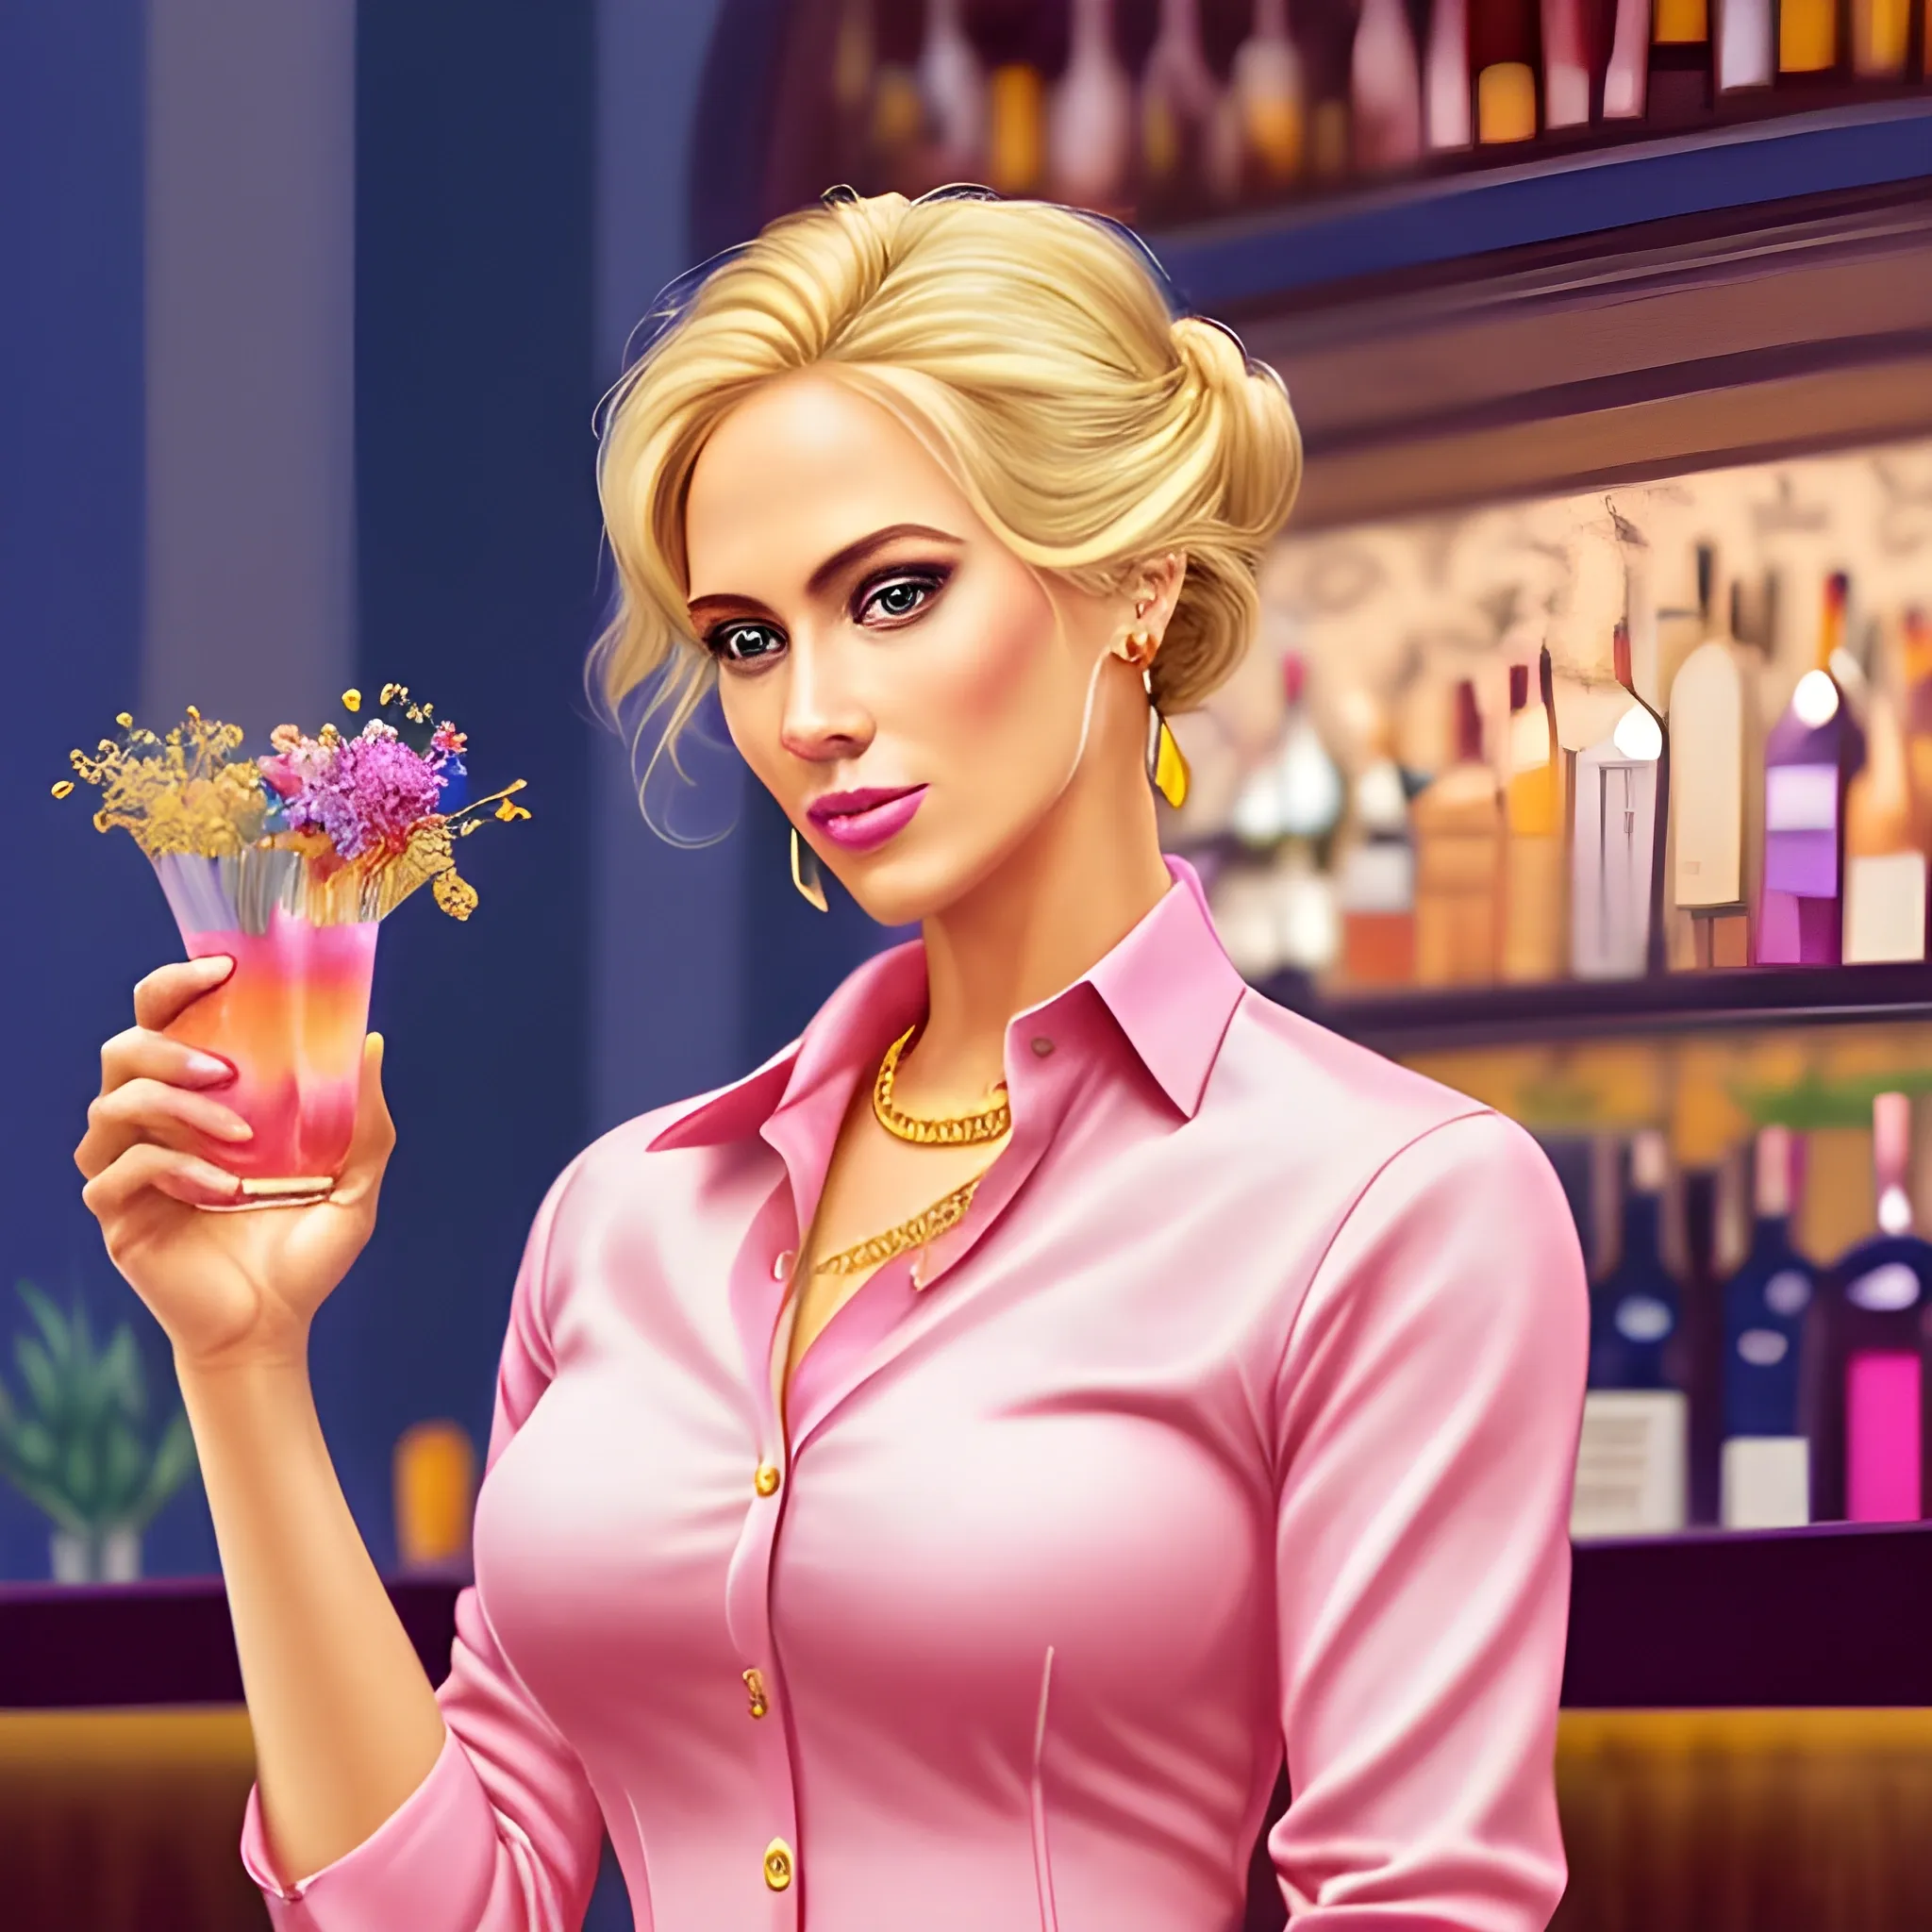 colored pencil, 30 year old beautiful latin rich blonde woman in a pink conservative suit,shirt buttoned up all the way, gold jewelry,  hair in a loose bun, in a dark fancy bar setting, holding a pink cocktail with flowers in it, with dried flowers of all colors floating in the air around her